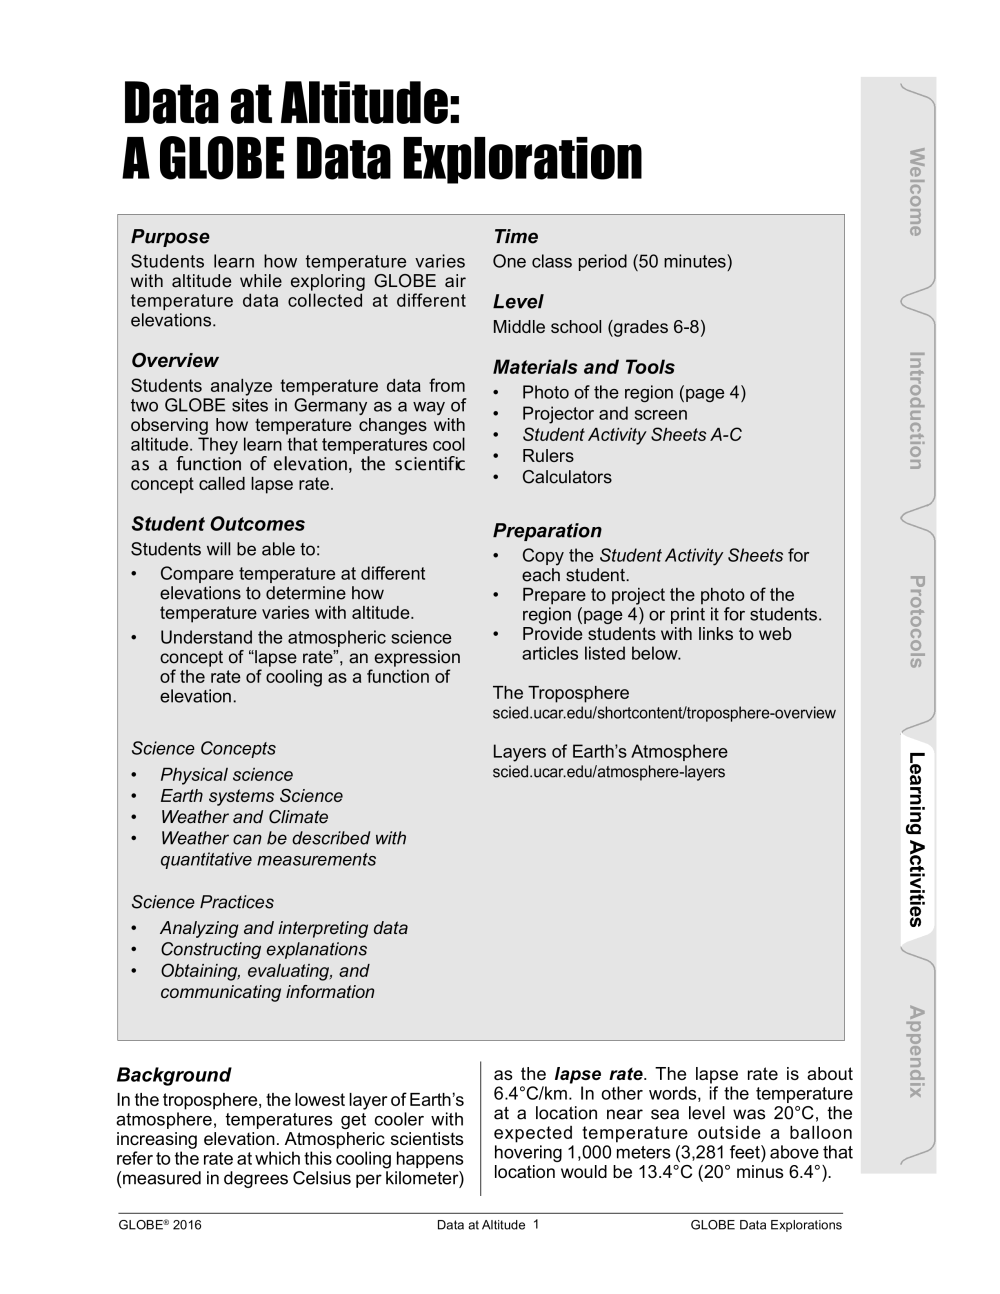 Learning Activities preview for Data at Altitude- A GLOBE Data Exploration